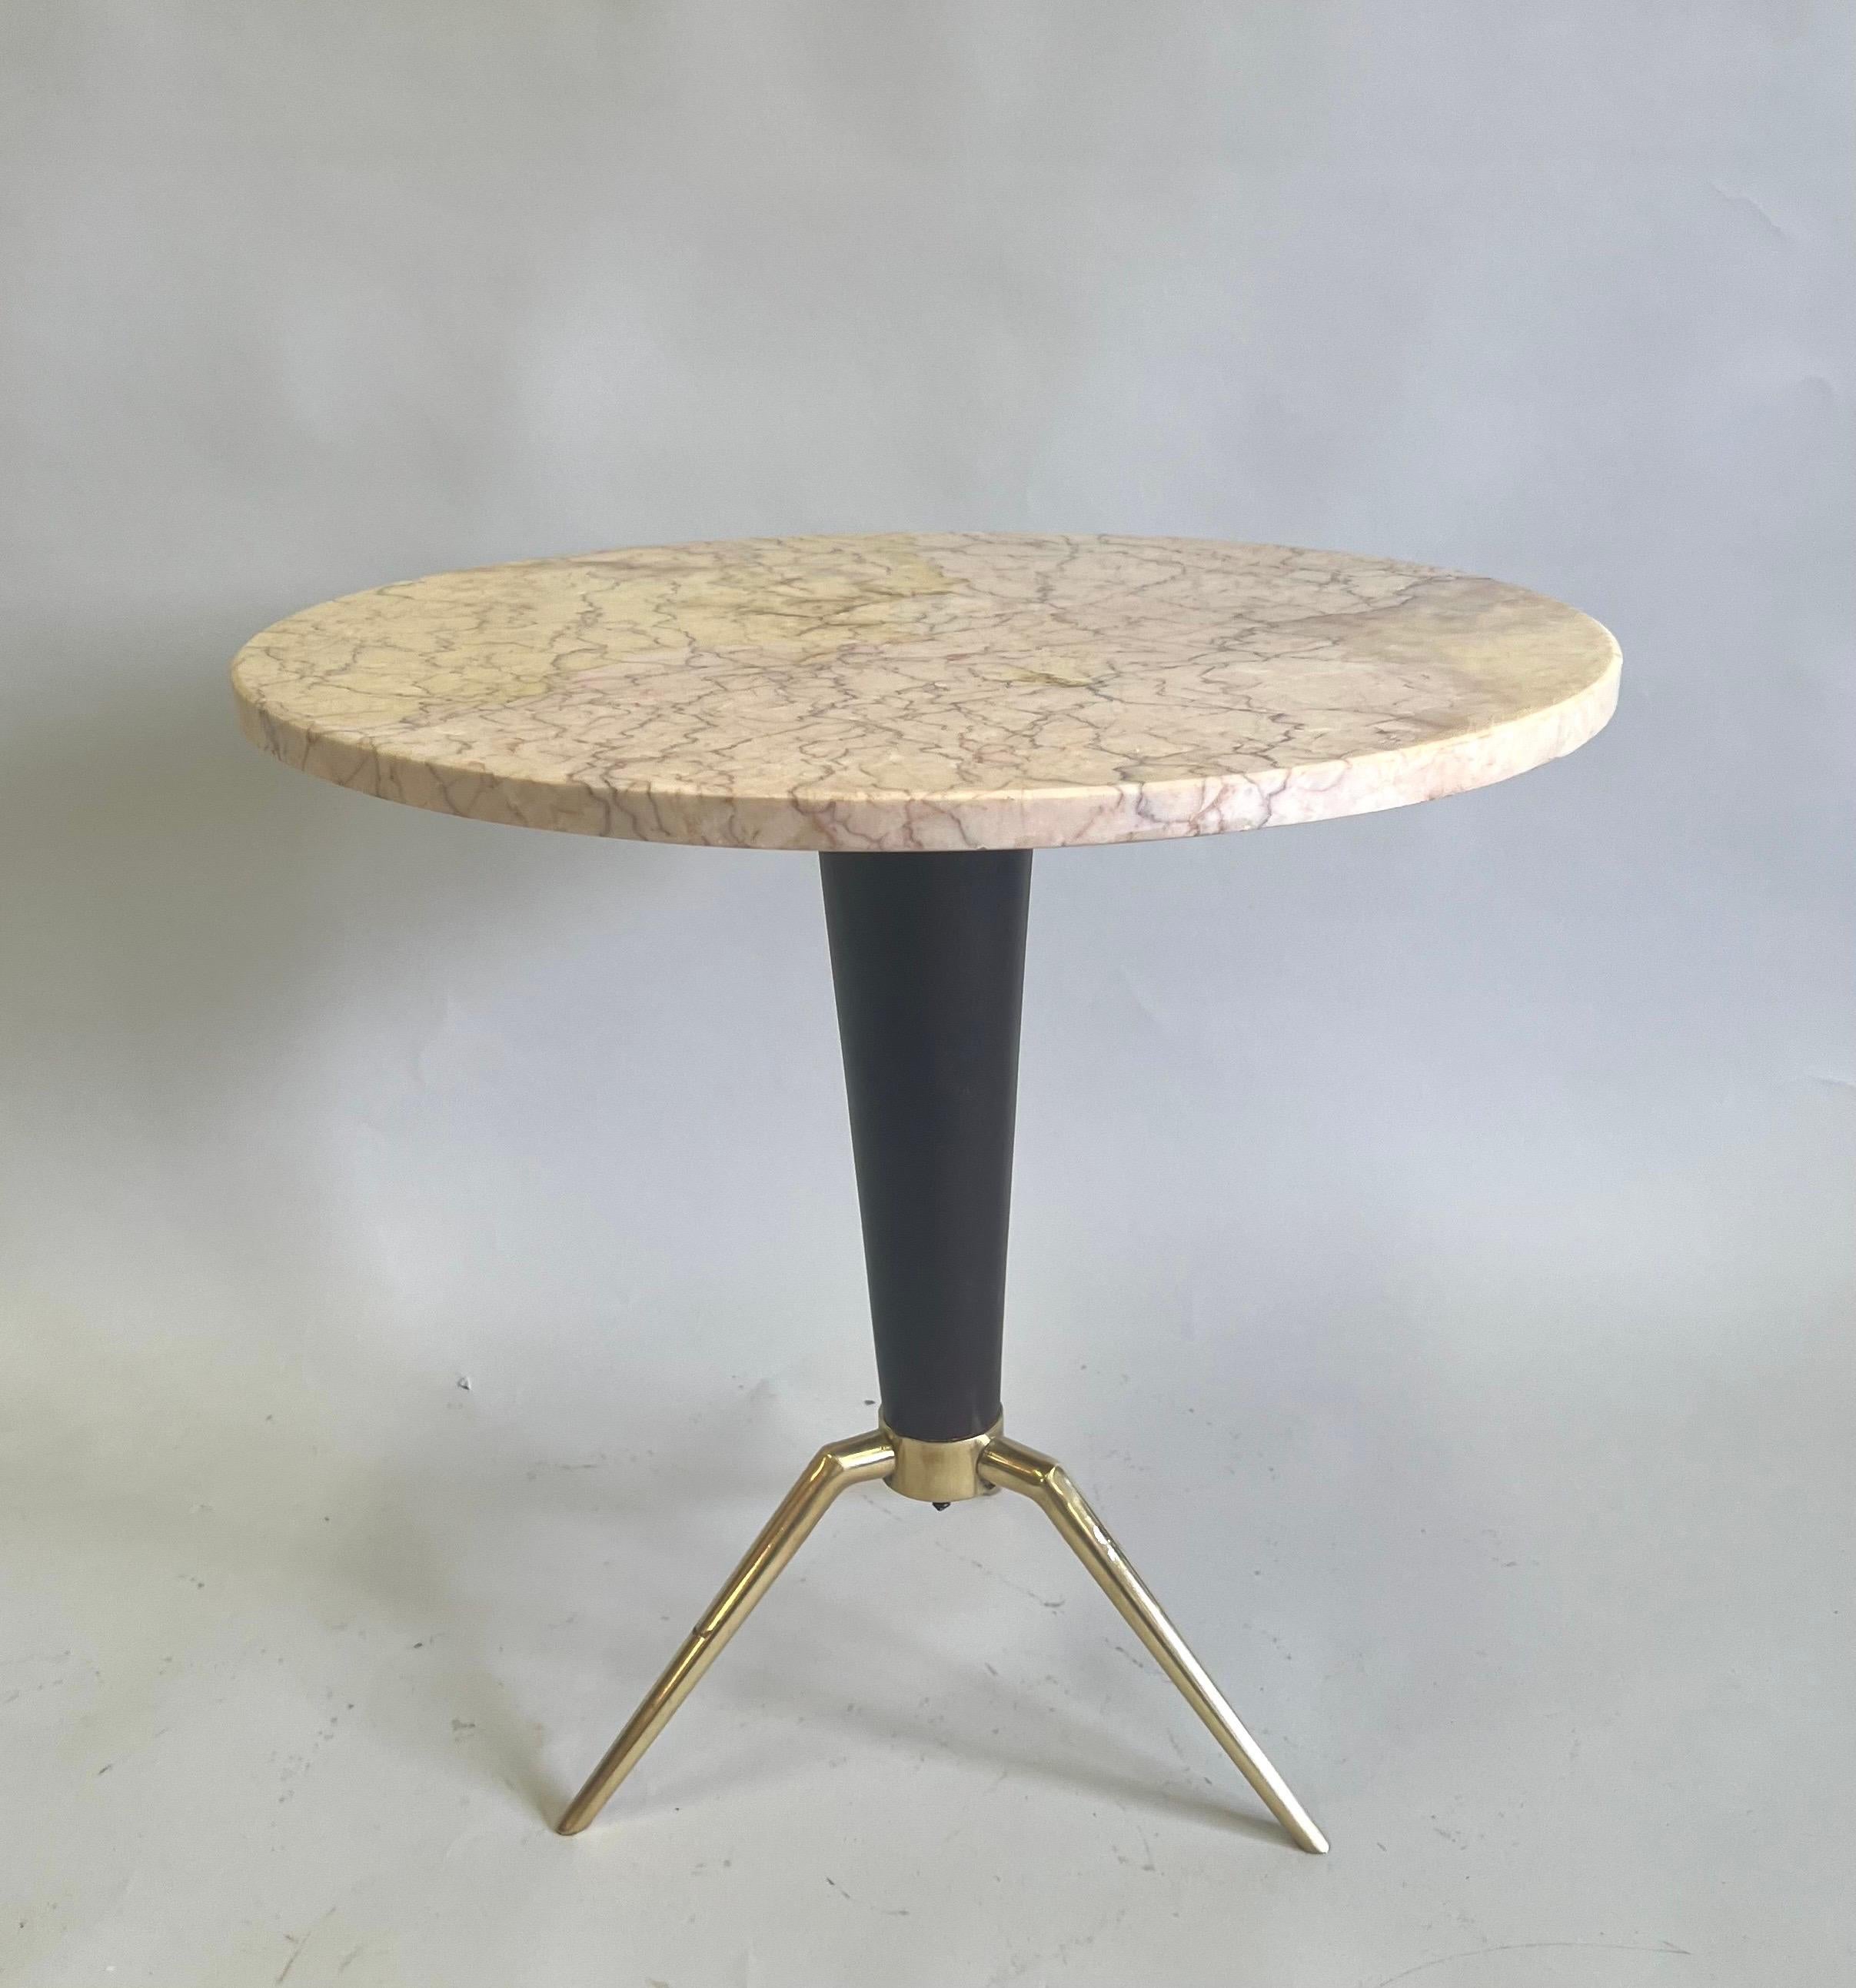 An Exceptional Italian Mid-Century Cocktail / Coffee Table or Side / End Table in the Modern Neoclassical Style attributed to Ico Parisi, Italy, circa 1951. This elegant and timeless table is a gem expressing a purity of lines, form, materials and